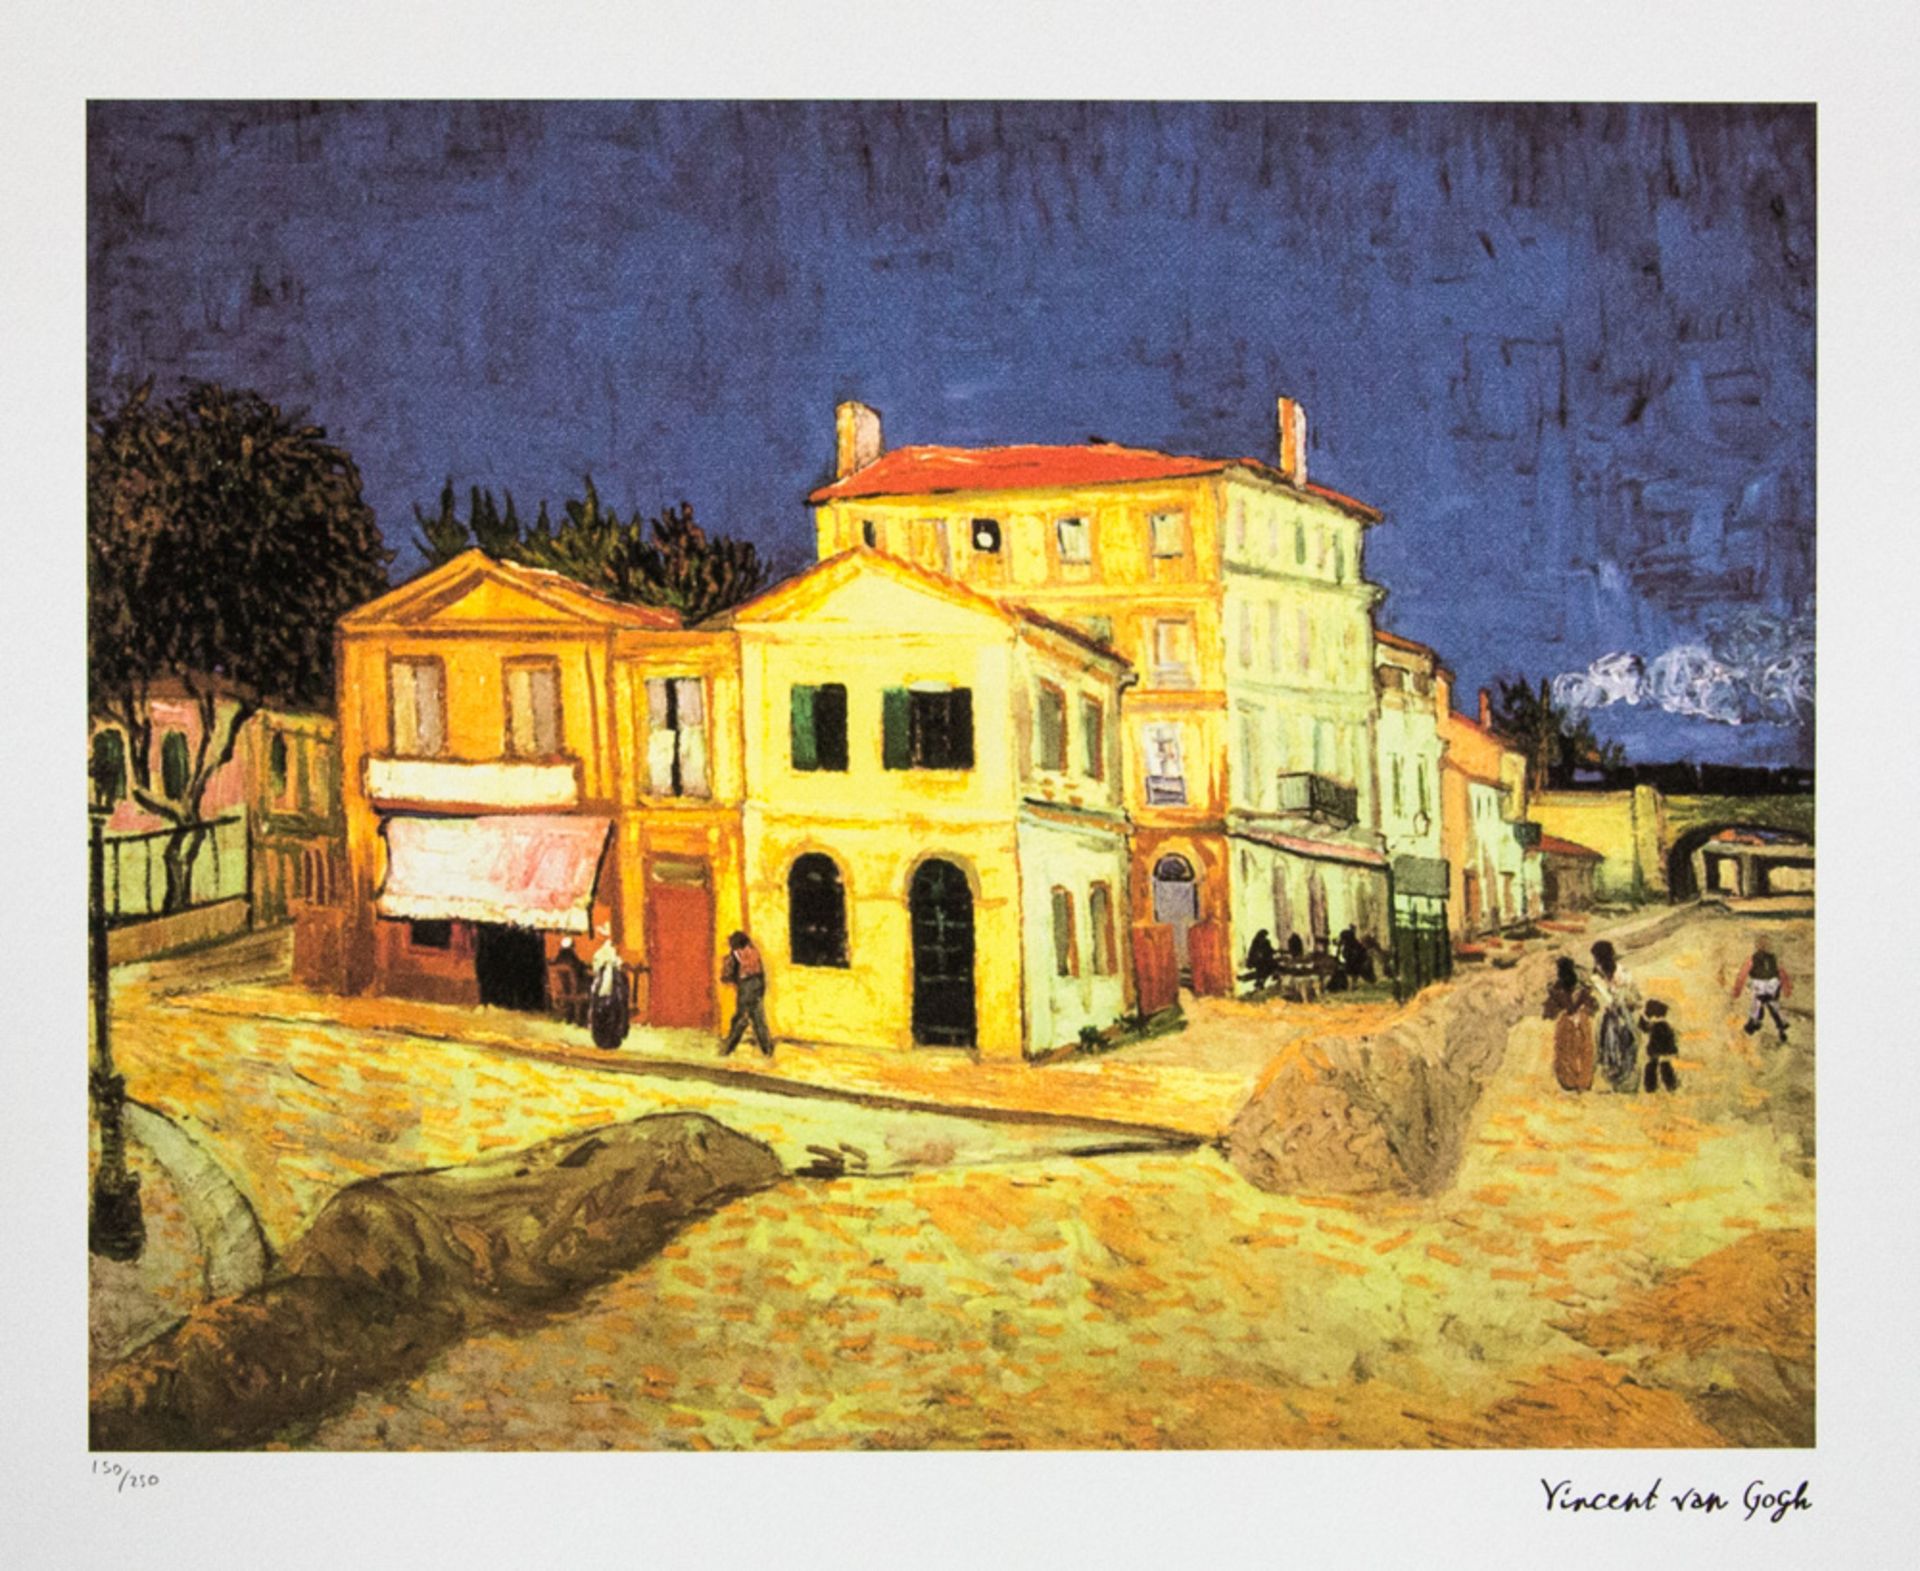 Vincent van Gogh 'The Yellow House'